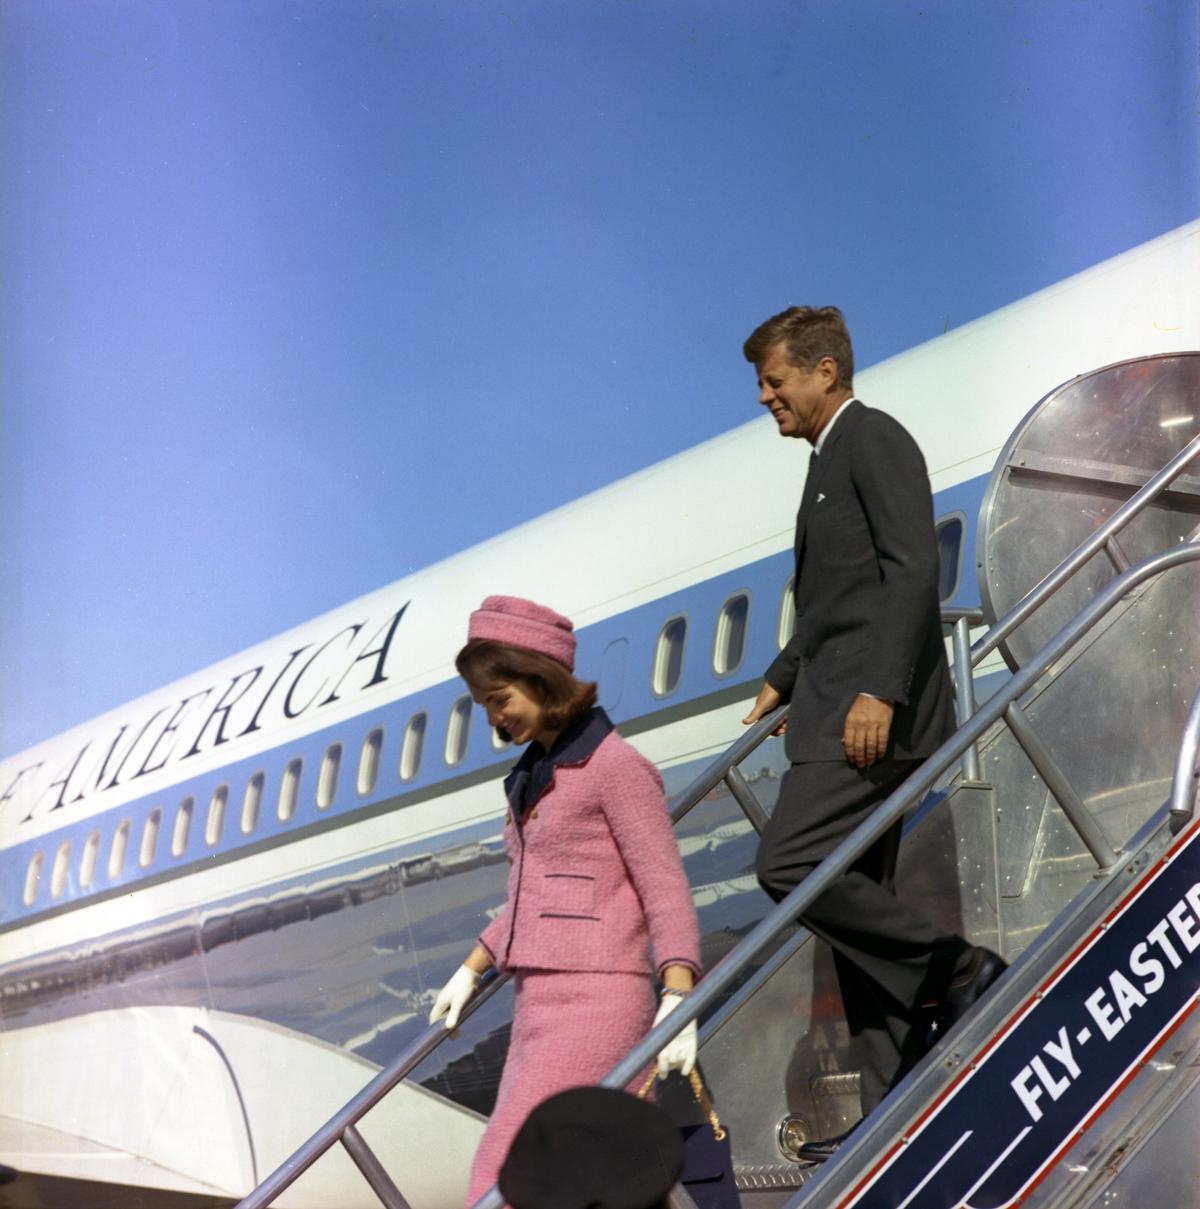 President and Mrs. Kennedy descend the stairs from Air Force One at Love Field in Dallas on Nov. 22, 1963. (Cecil Stoughton/John F. Kennedy Presidential Library and Museum, Boston)